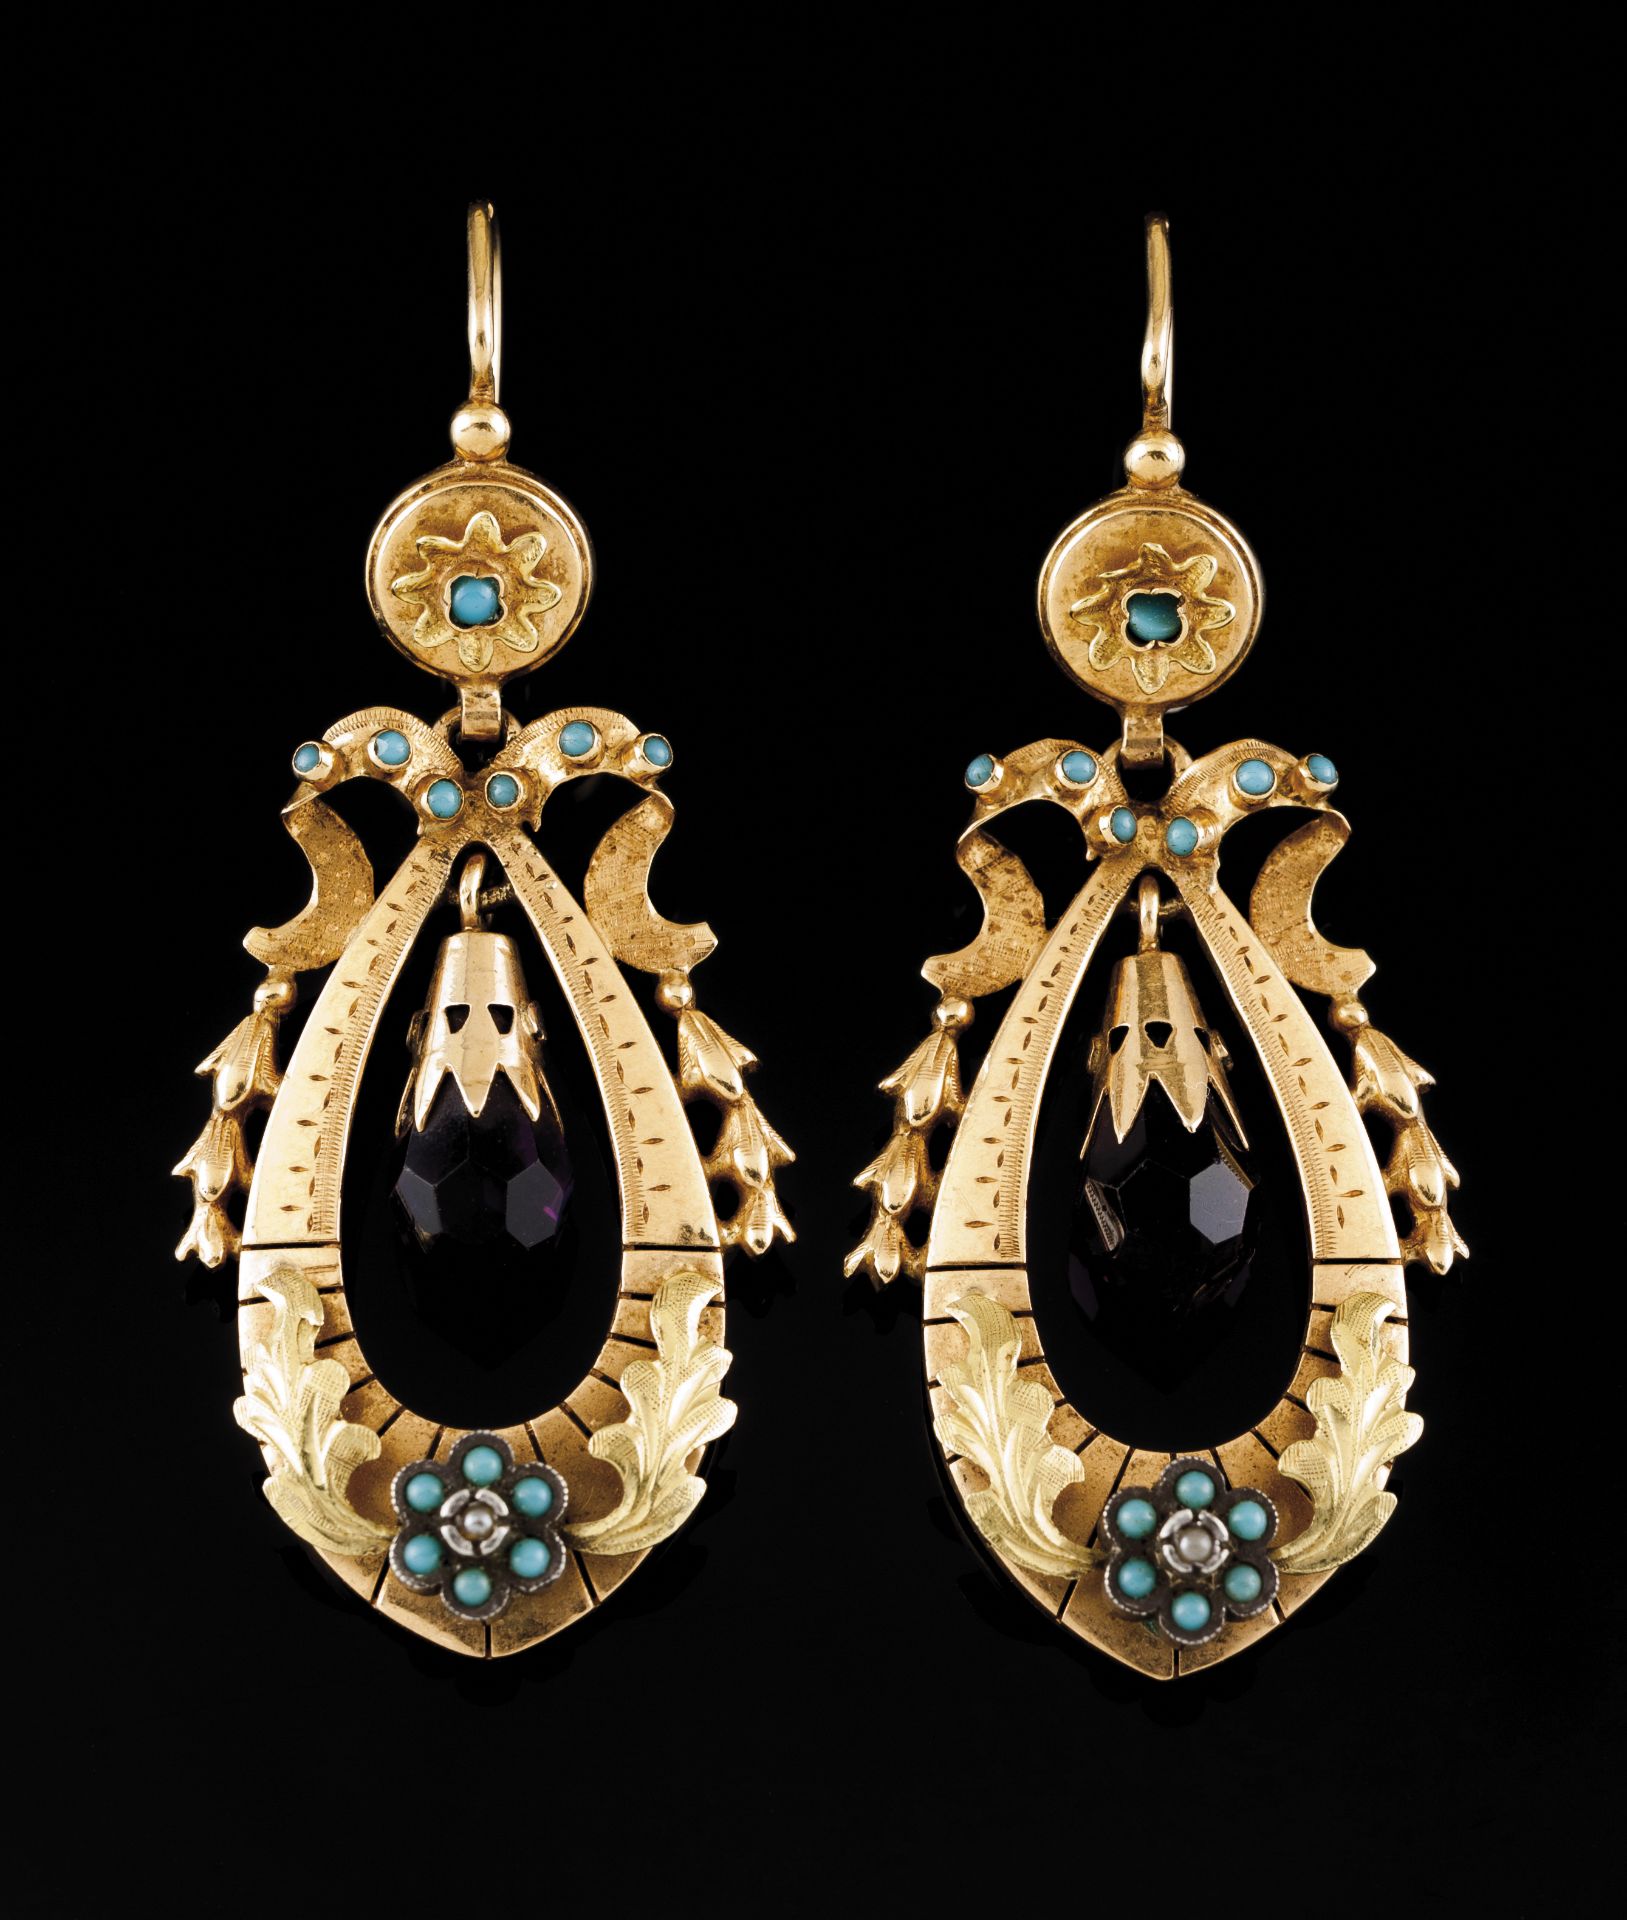 A pair of earringsPortuguese traditional gold and silverChiselled articulated drop of foliage and